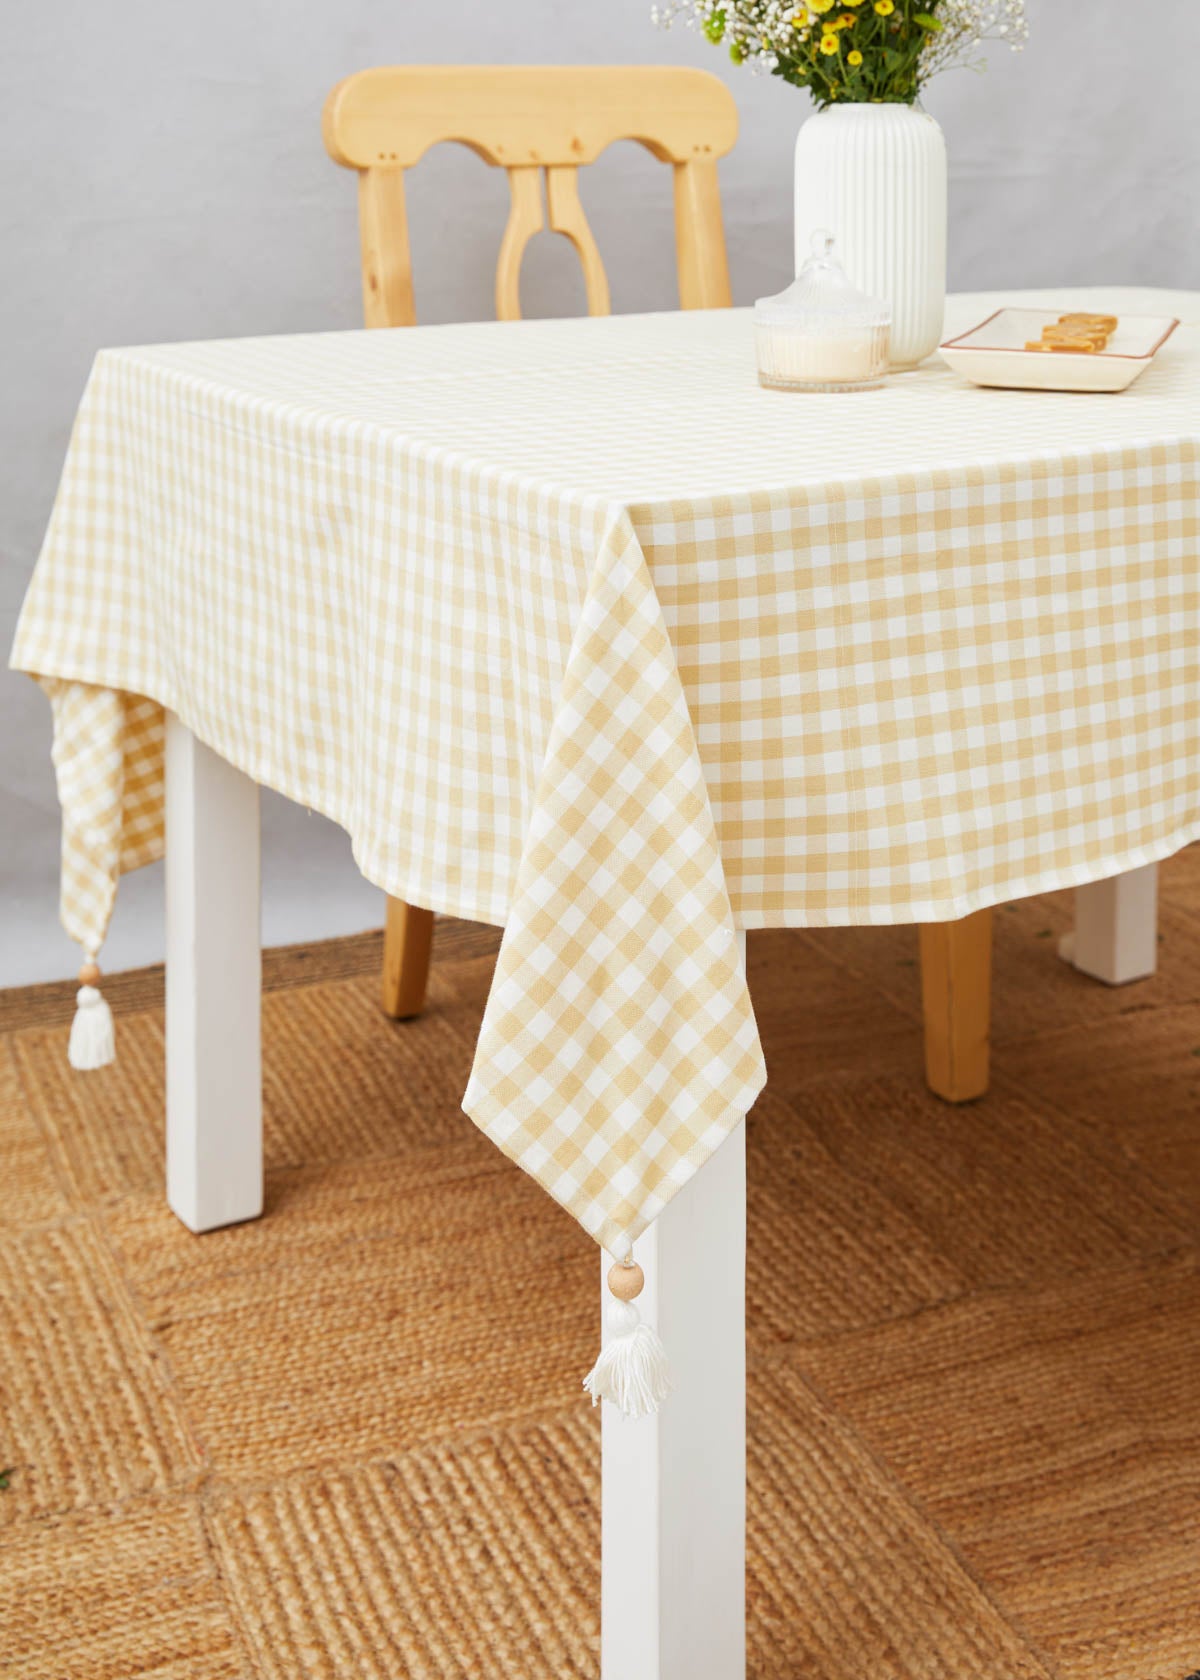 Gingham checks 100% cotton geometric table cloth for 4 seater or 6 seater dining - Ivory